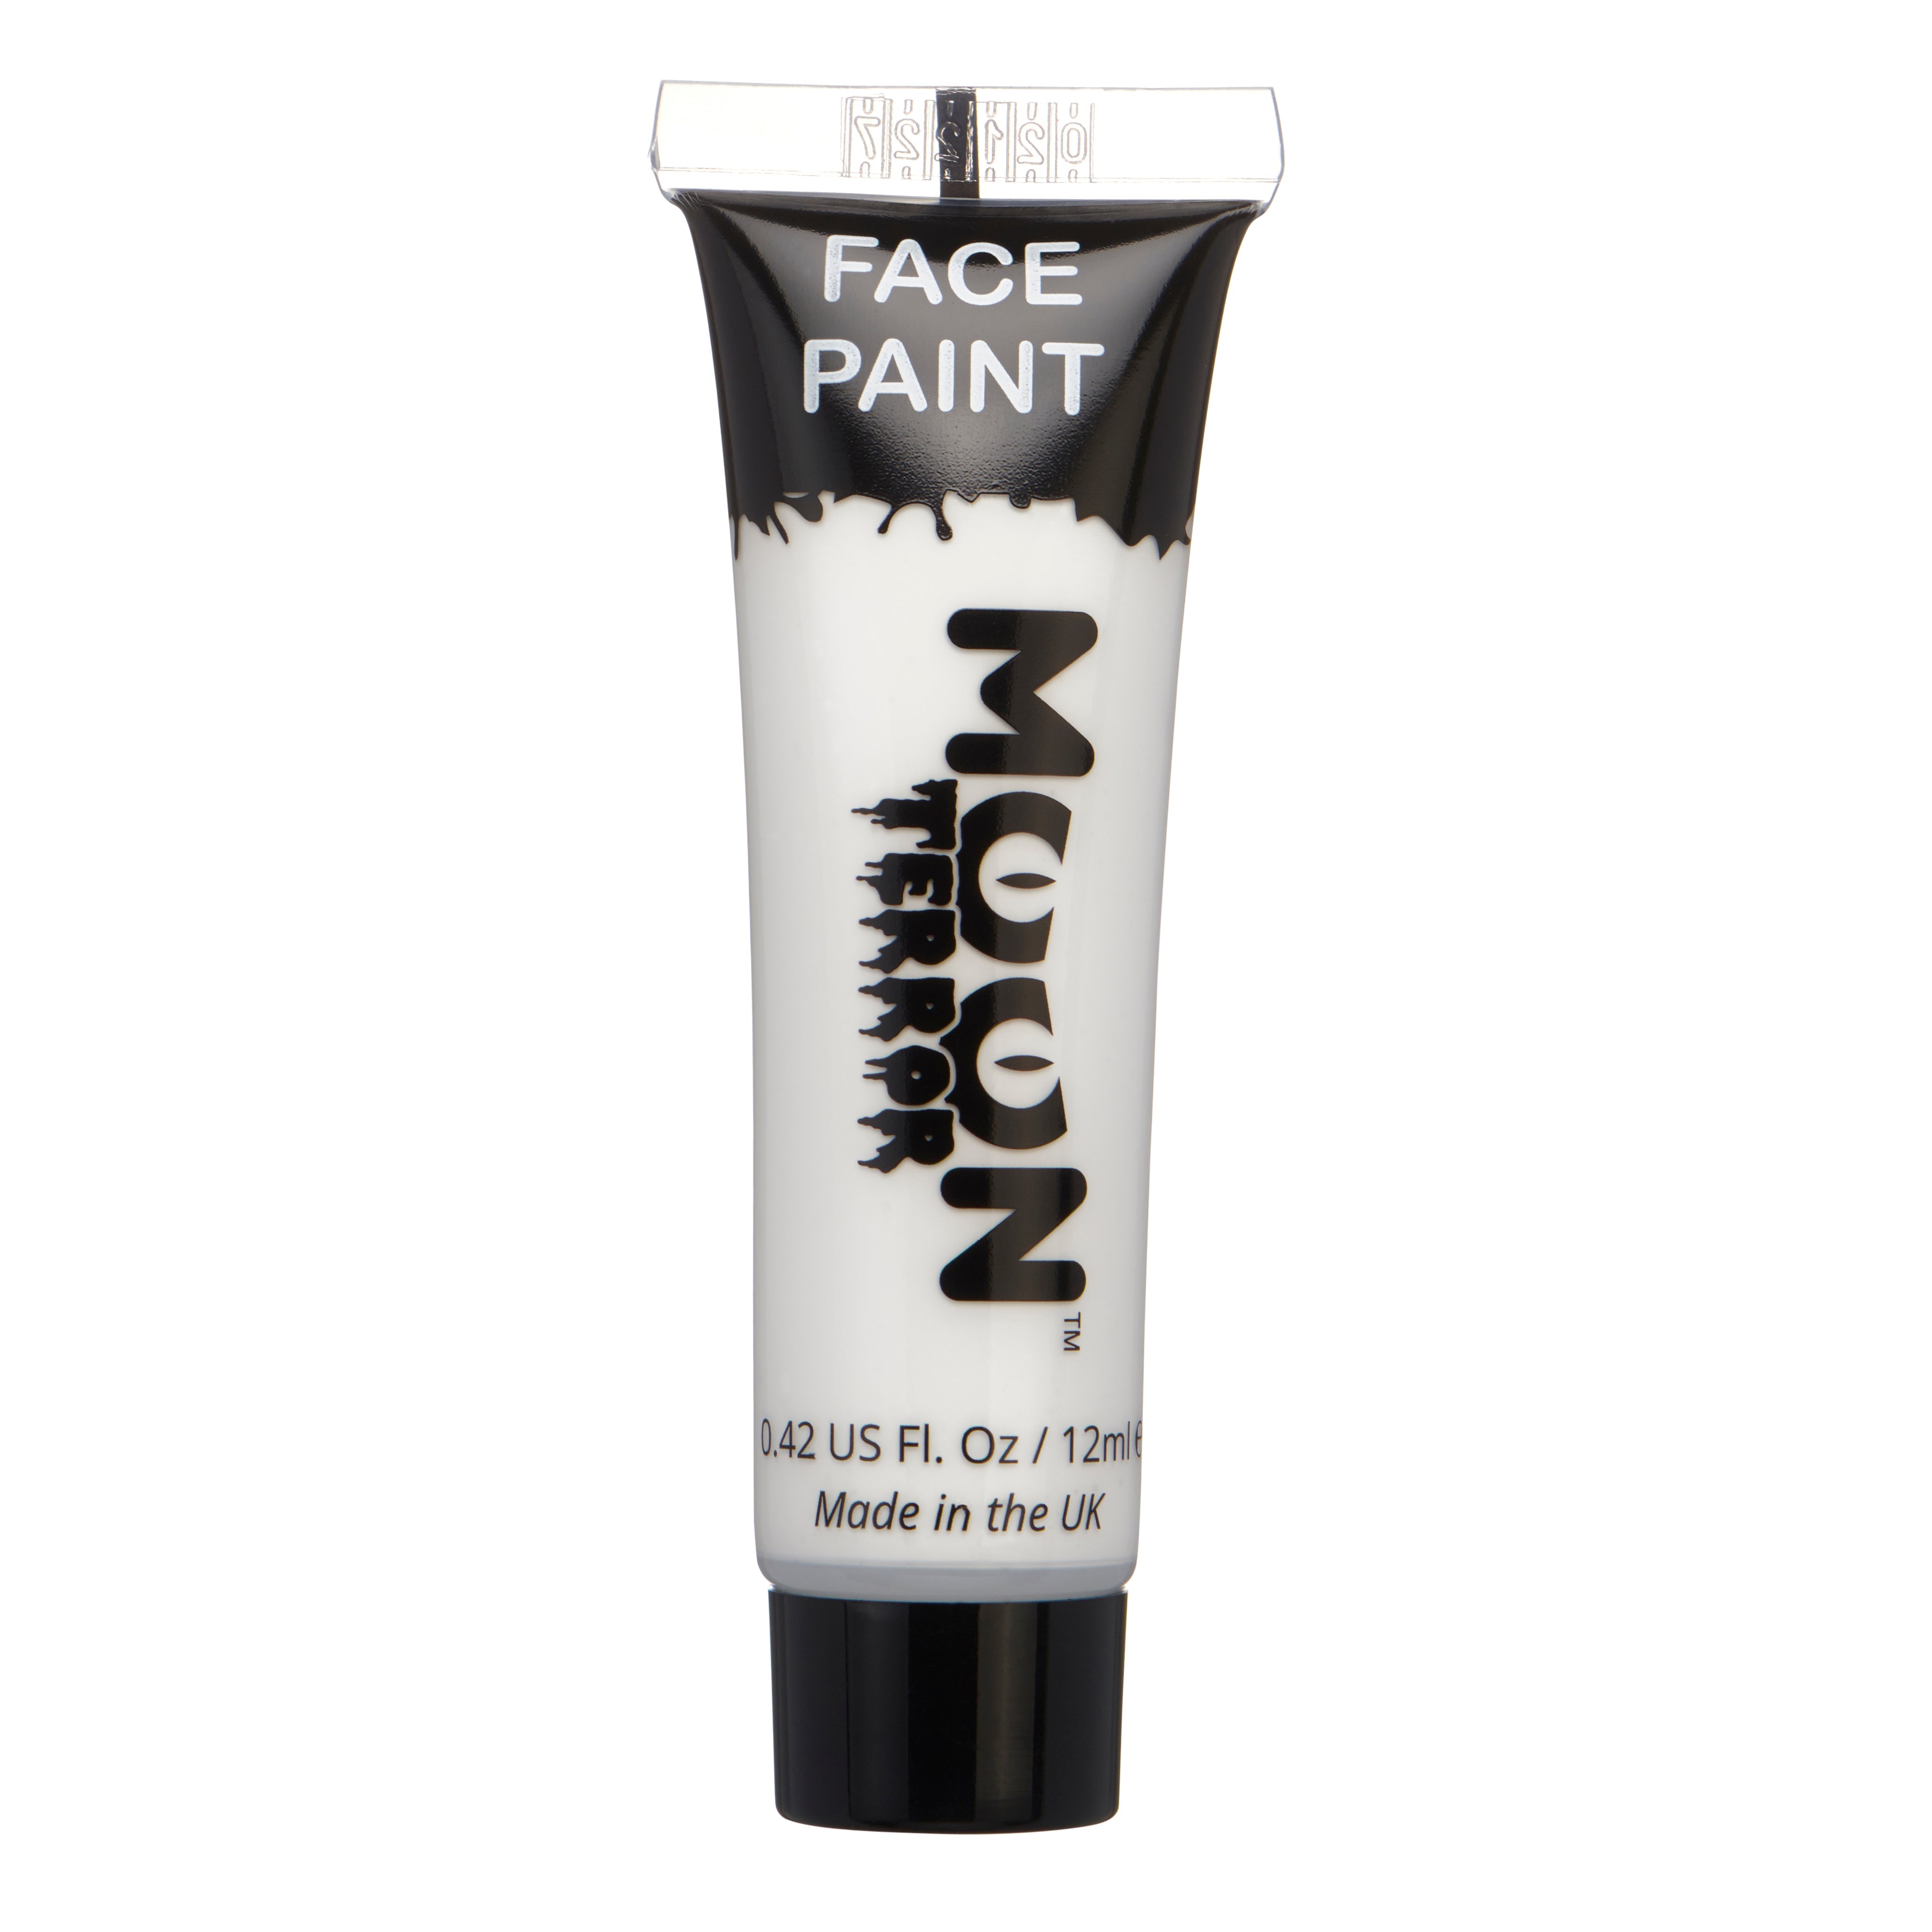 Wicked White - Terror Face & Body Paint Makeup, 12mL. Cosmetically certified, FDA & Health Canada compliant, cruelty free and vegan.